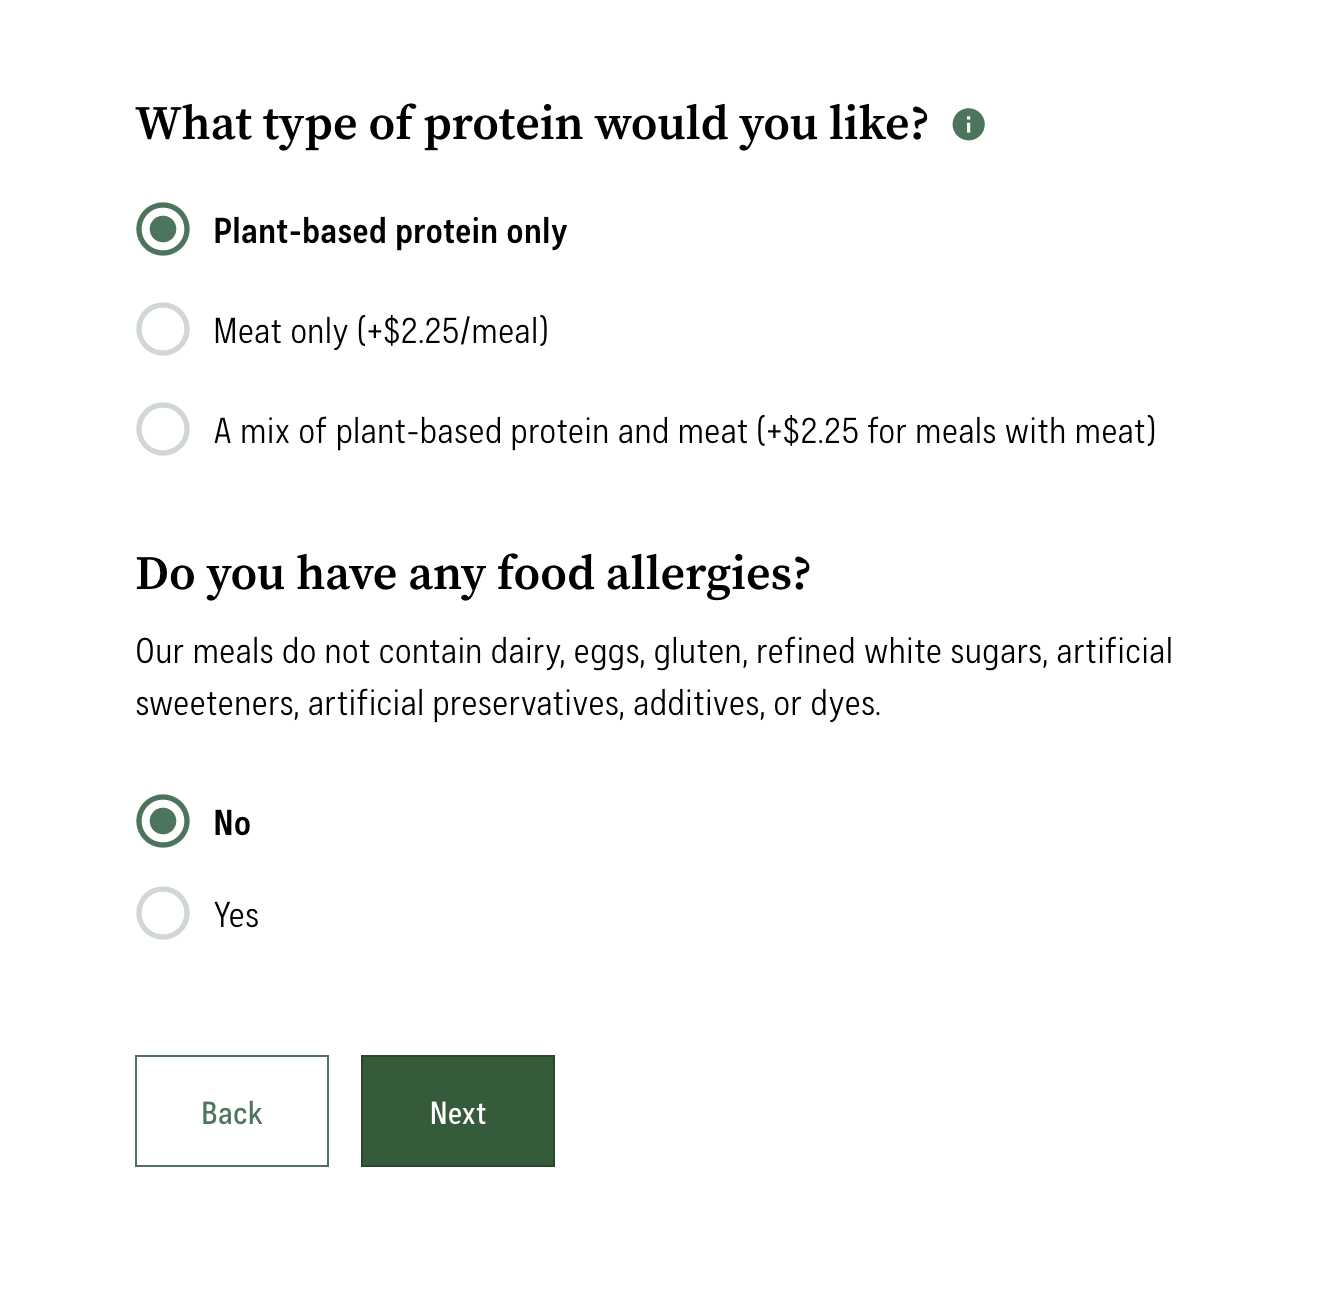 picture of the page asking what proteins you would like and if you have any allergies